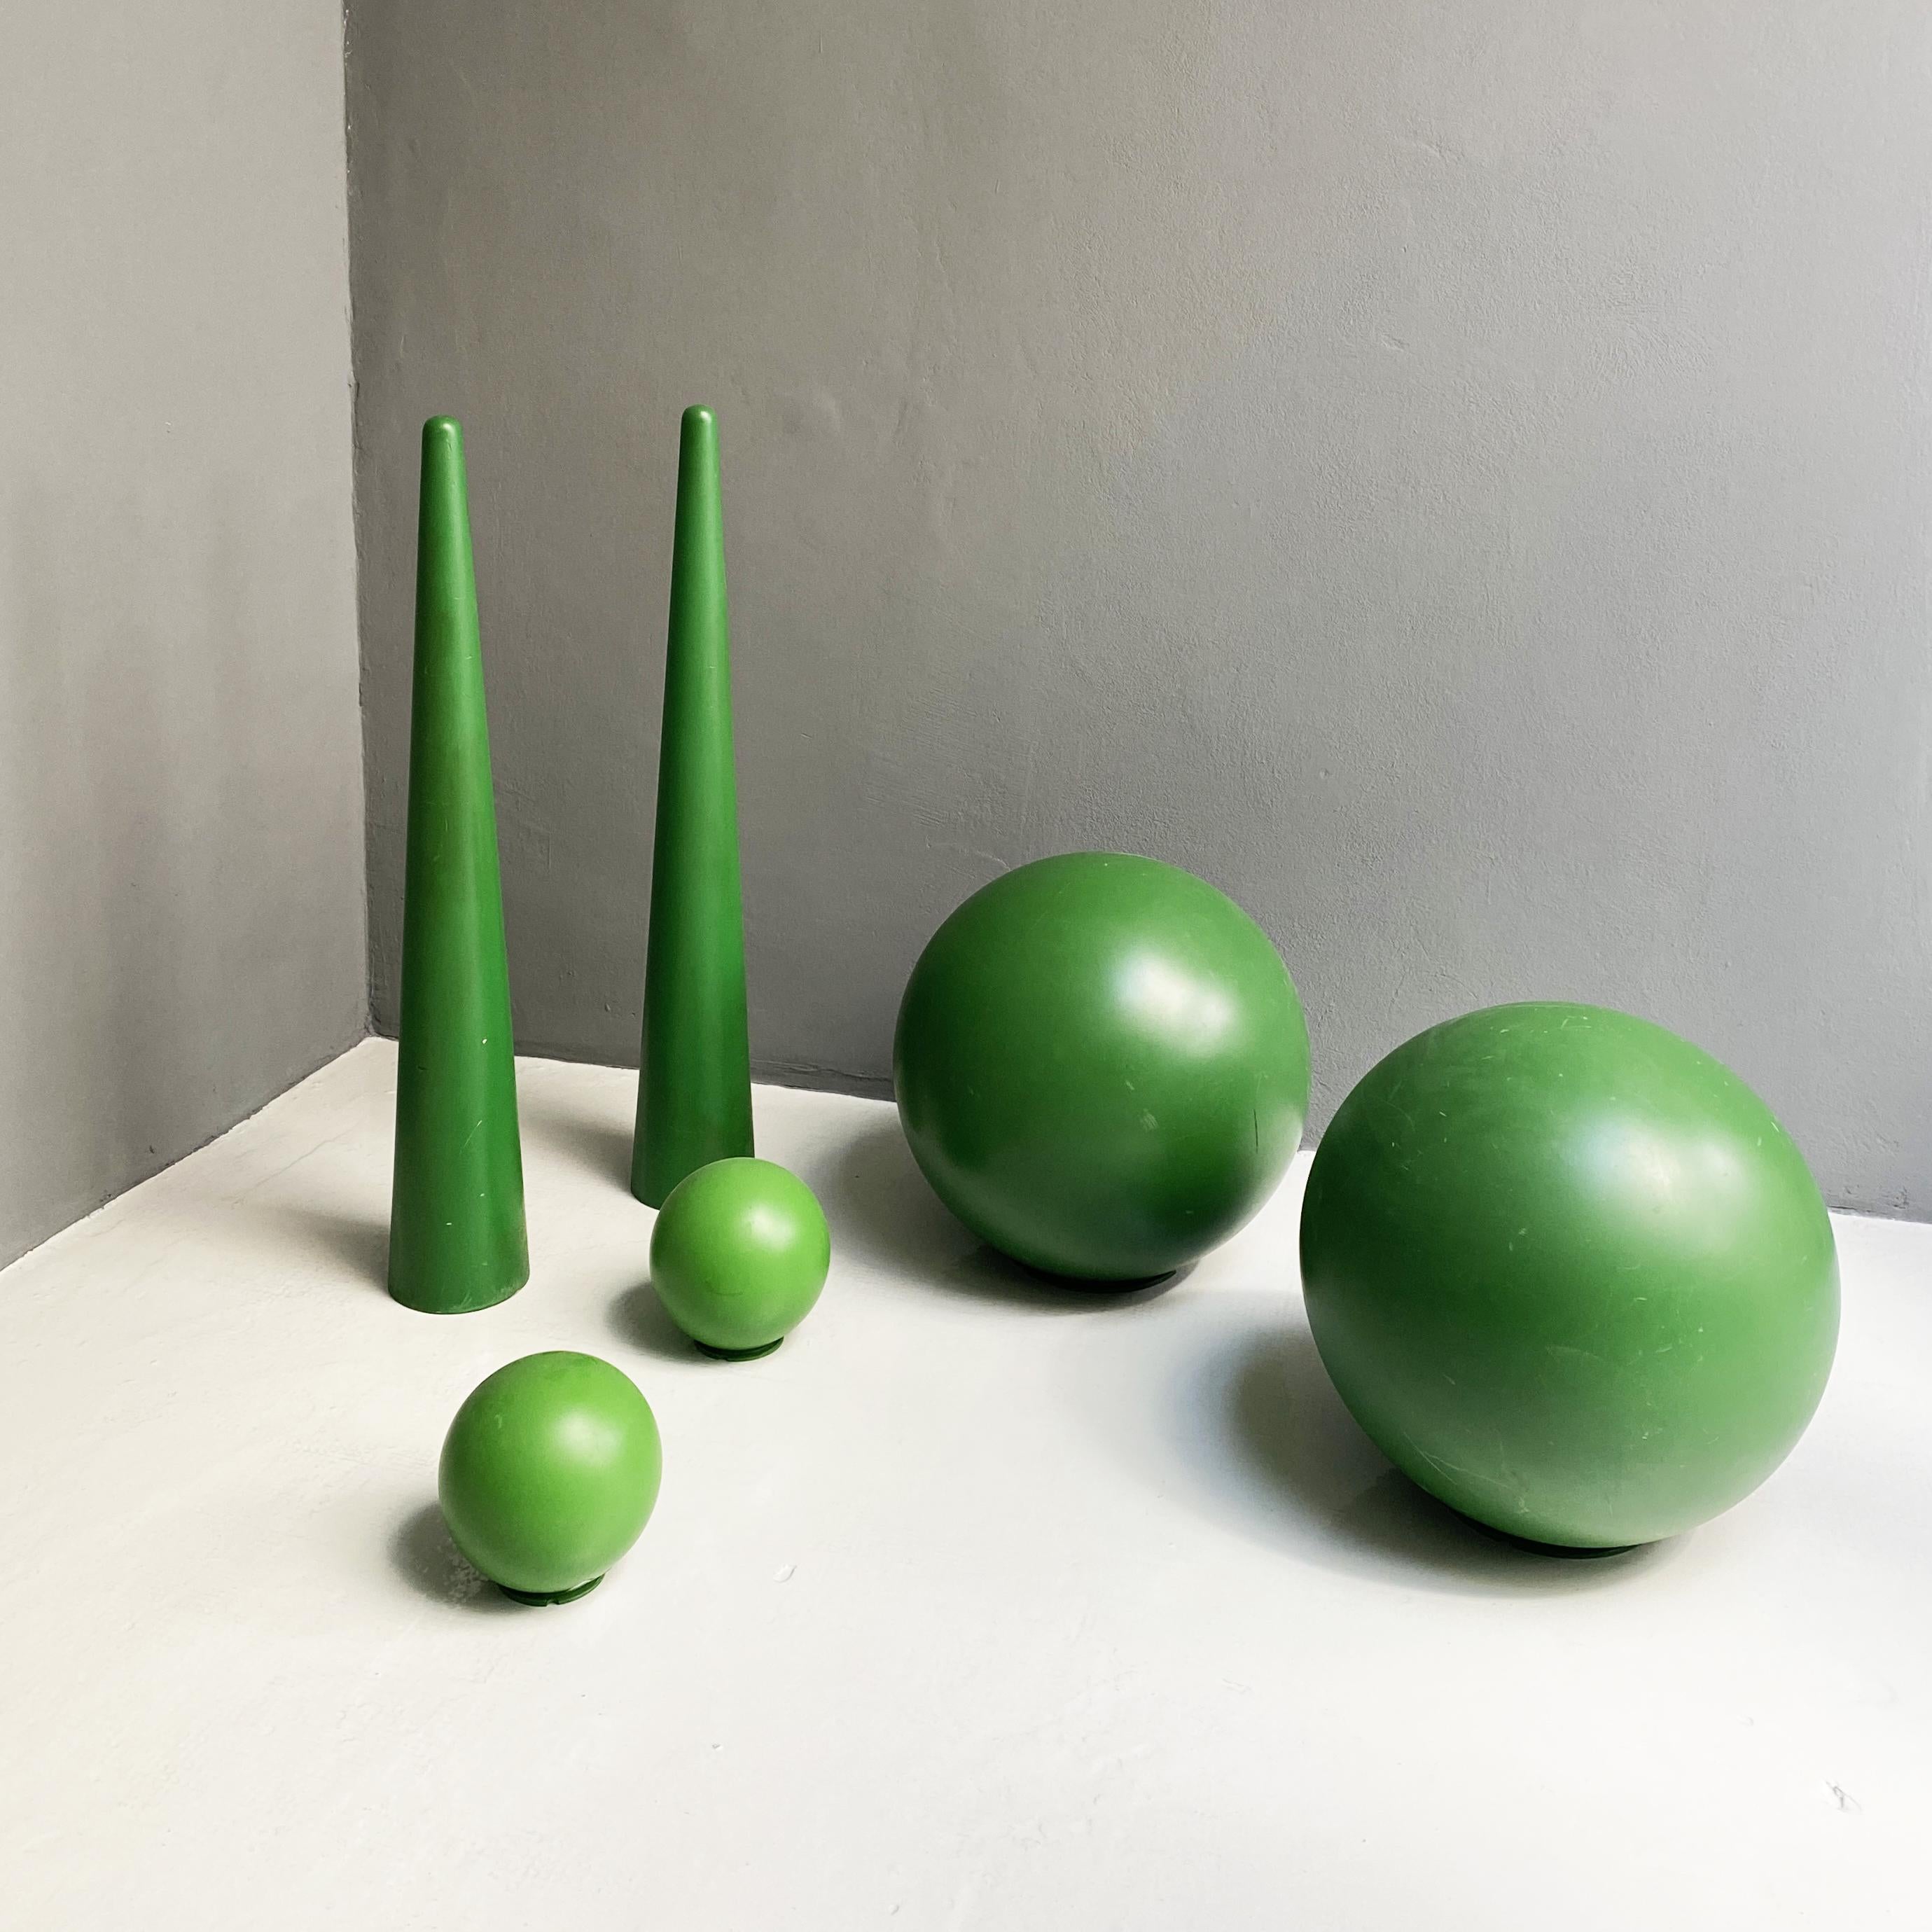 Italian Modern Green Plastic Props for Scenography, 1990s For Sale 7